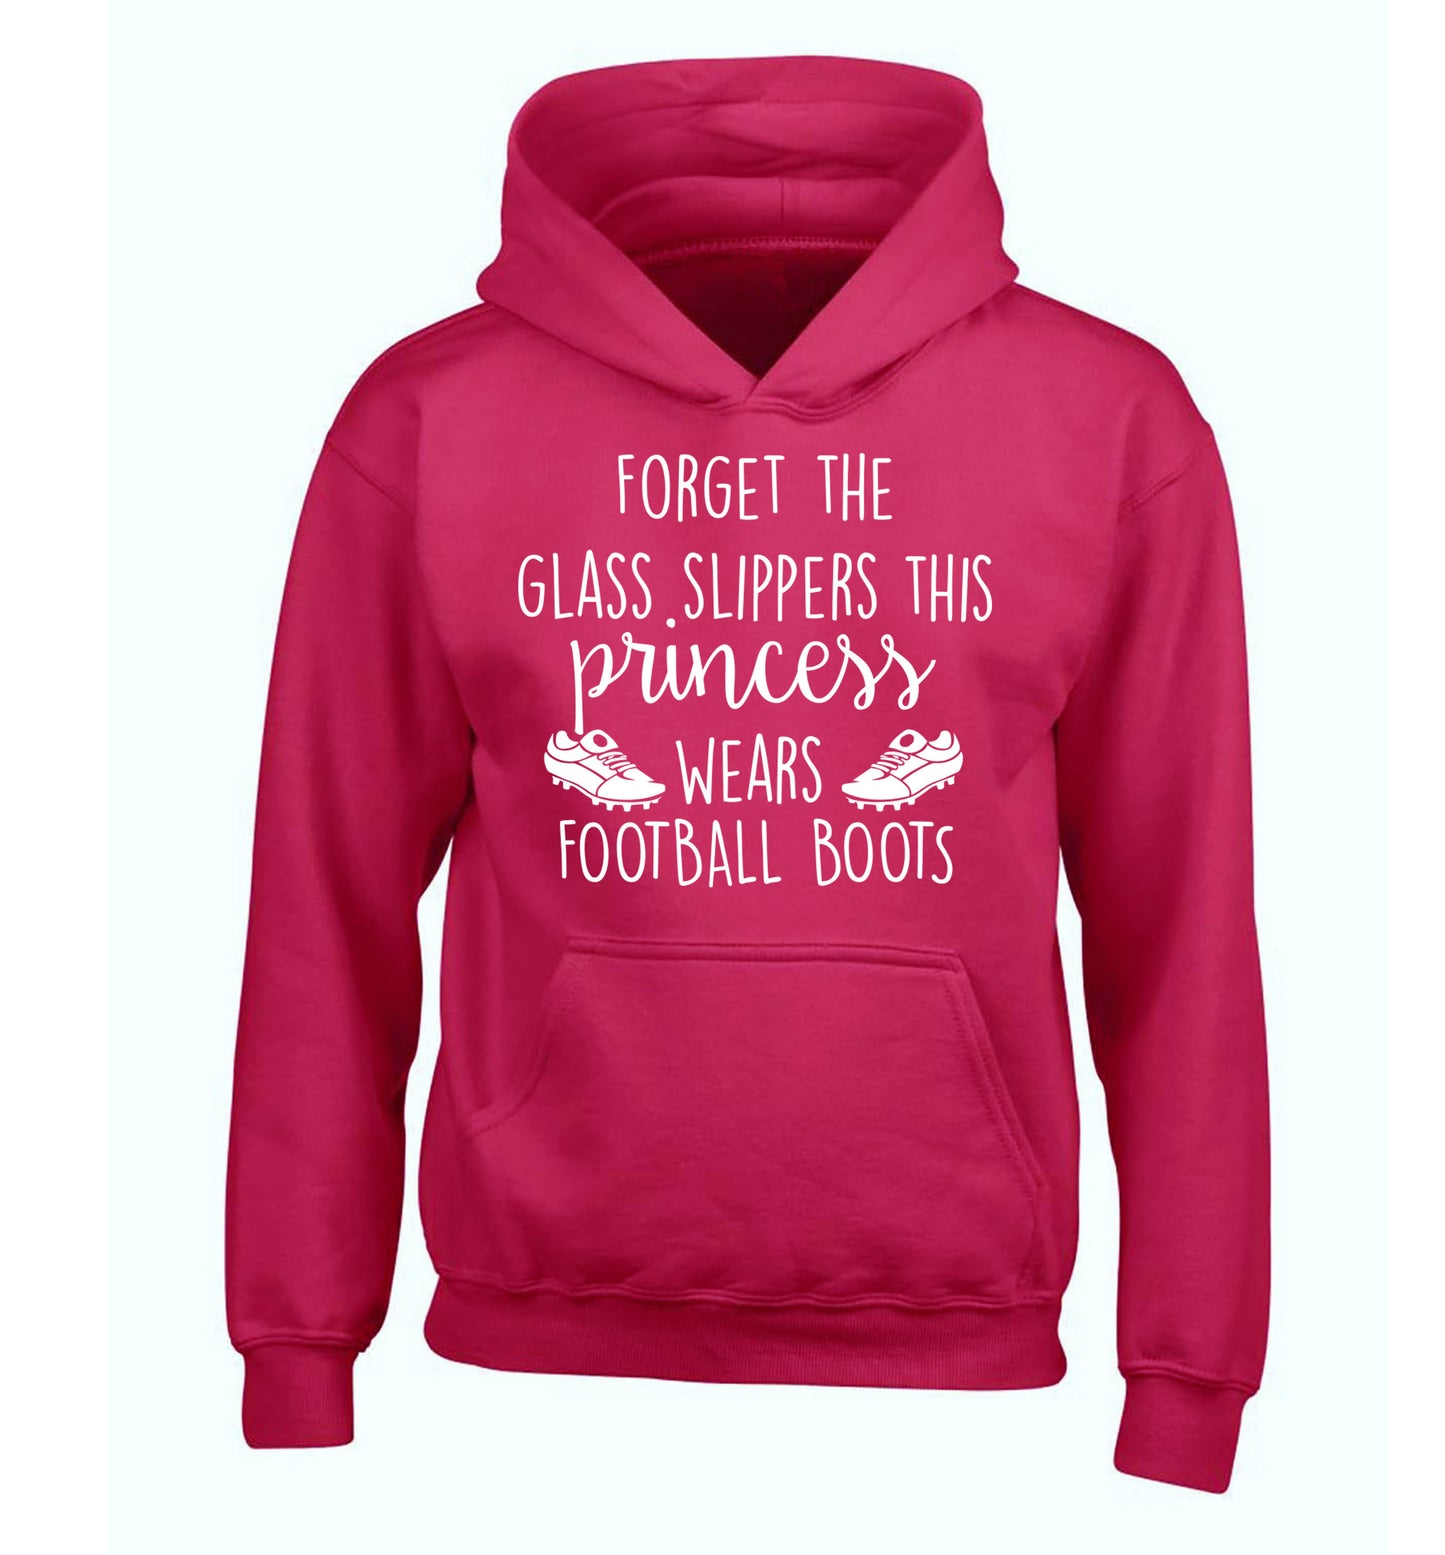 Forget the glass slippers this princess wears football boots children's pink hoodie 12-14 Years